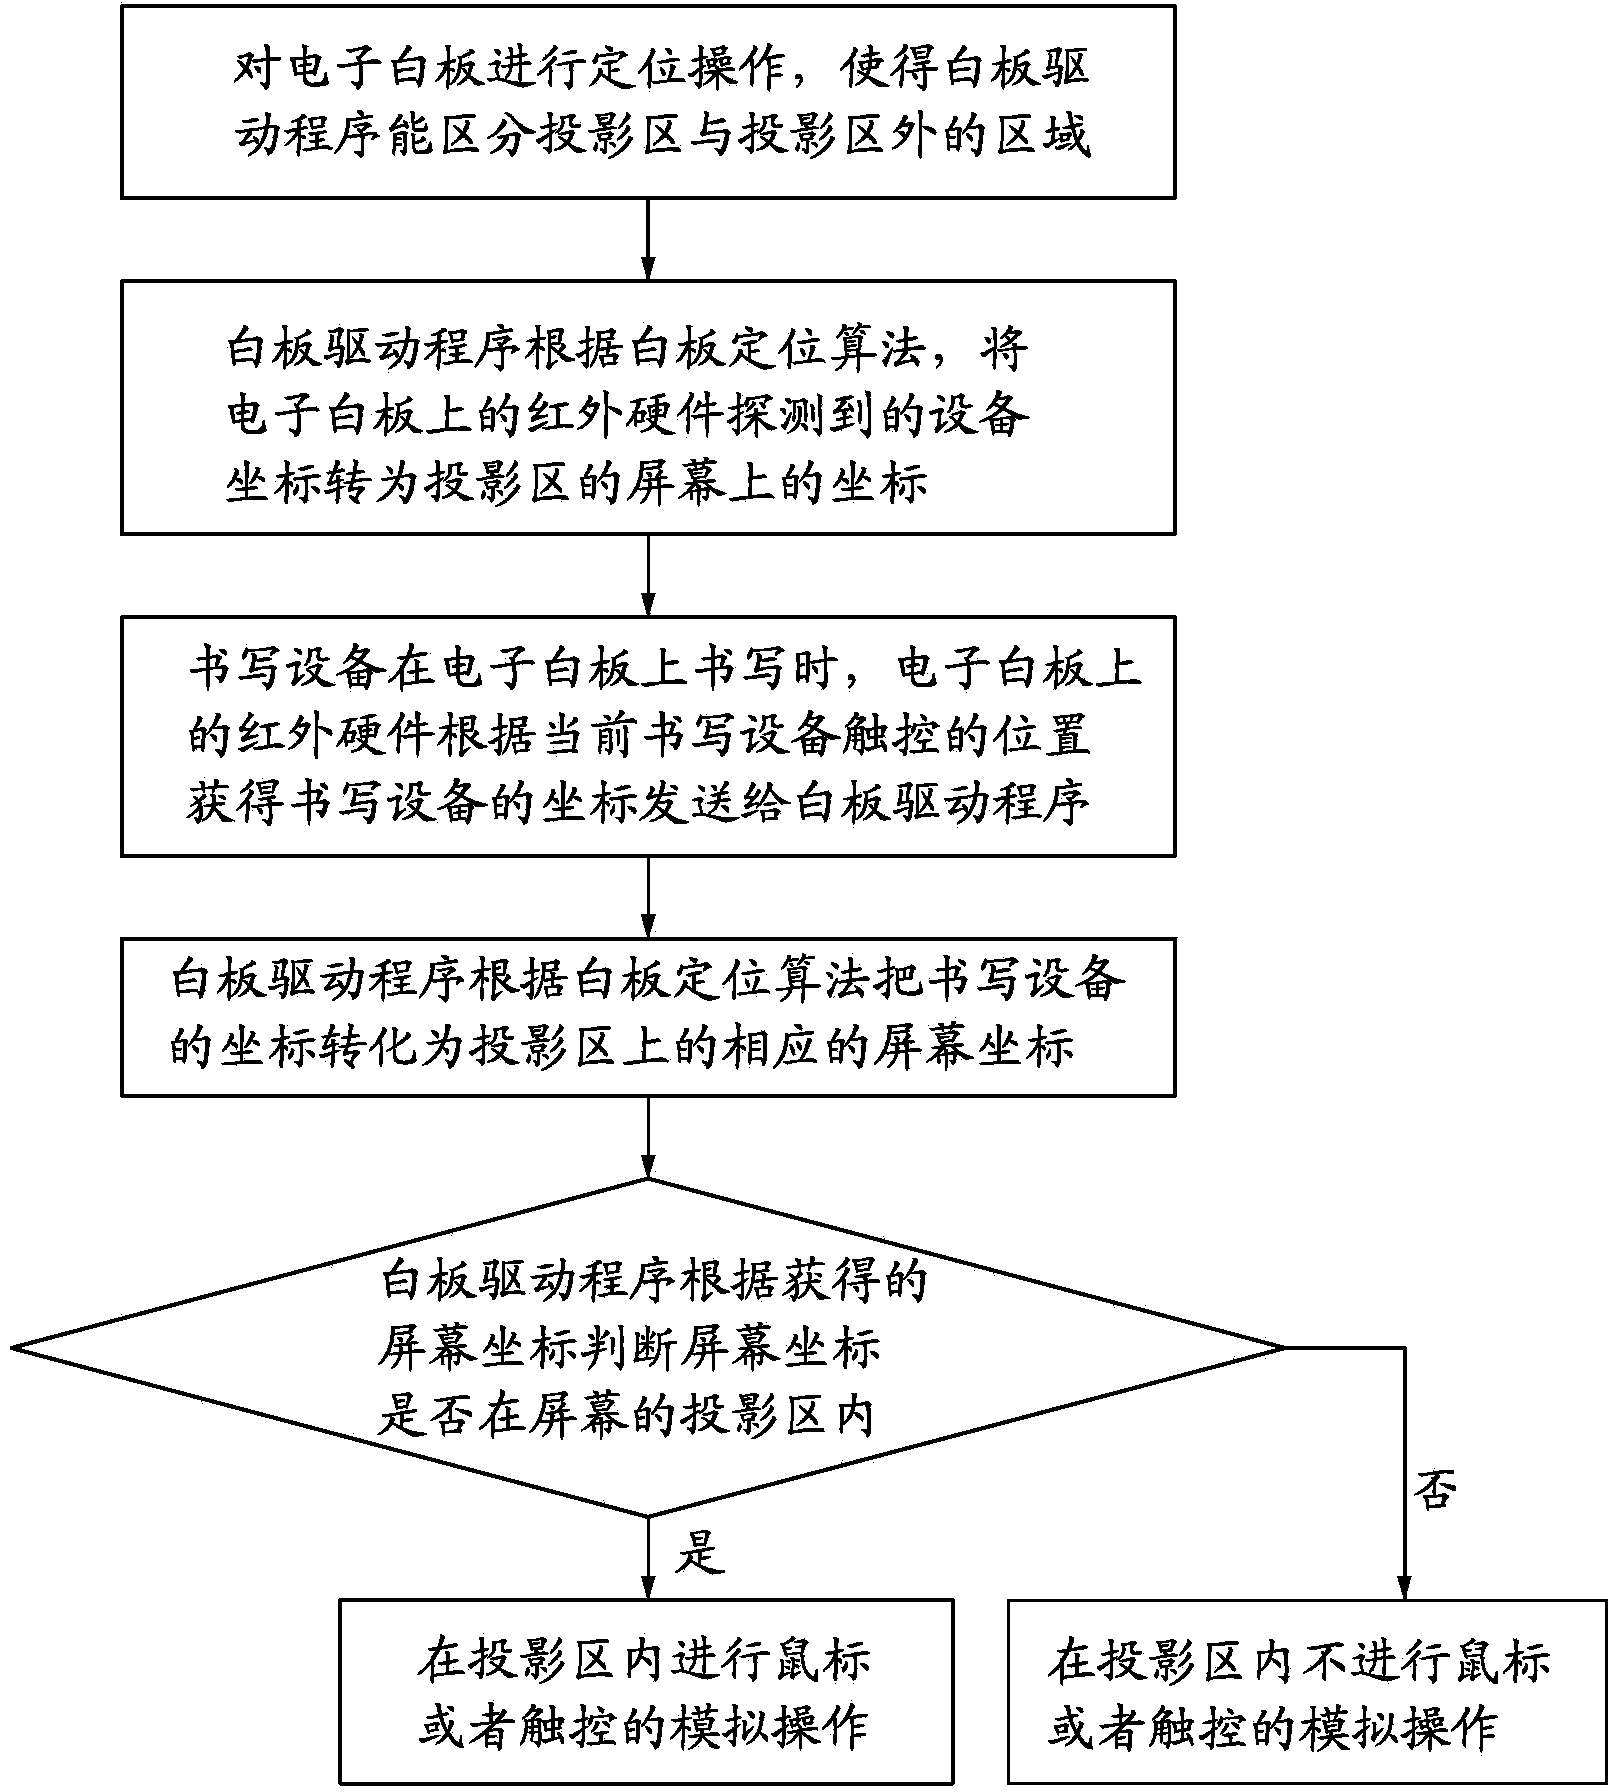 Method for supporting writing simultaneously in and out of electronic white board projection area